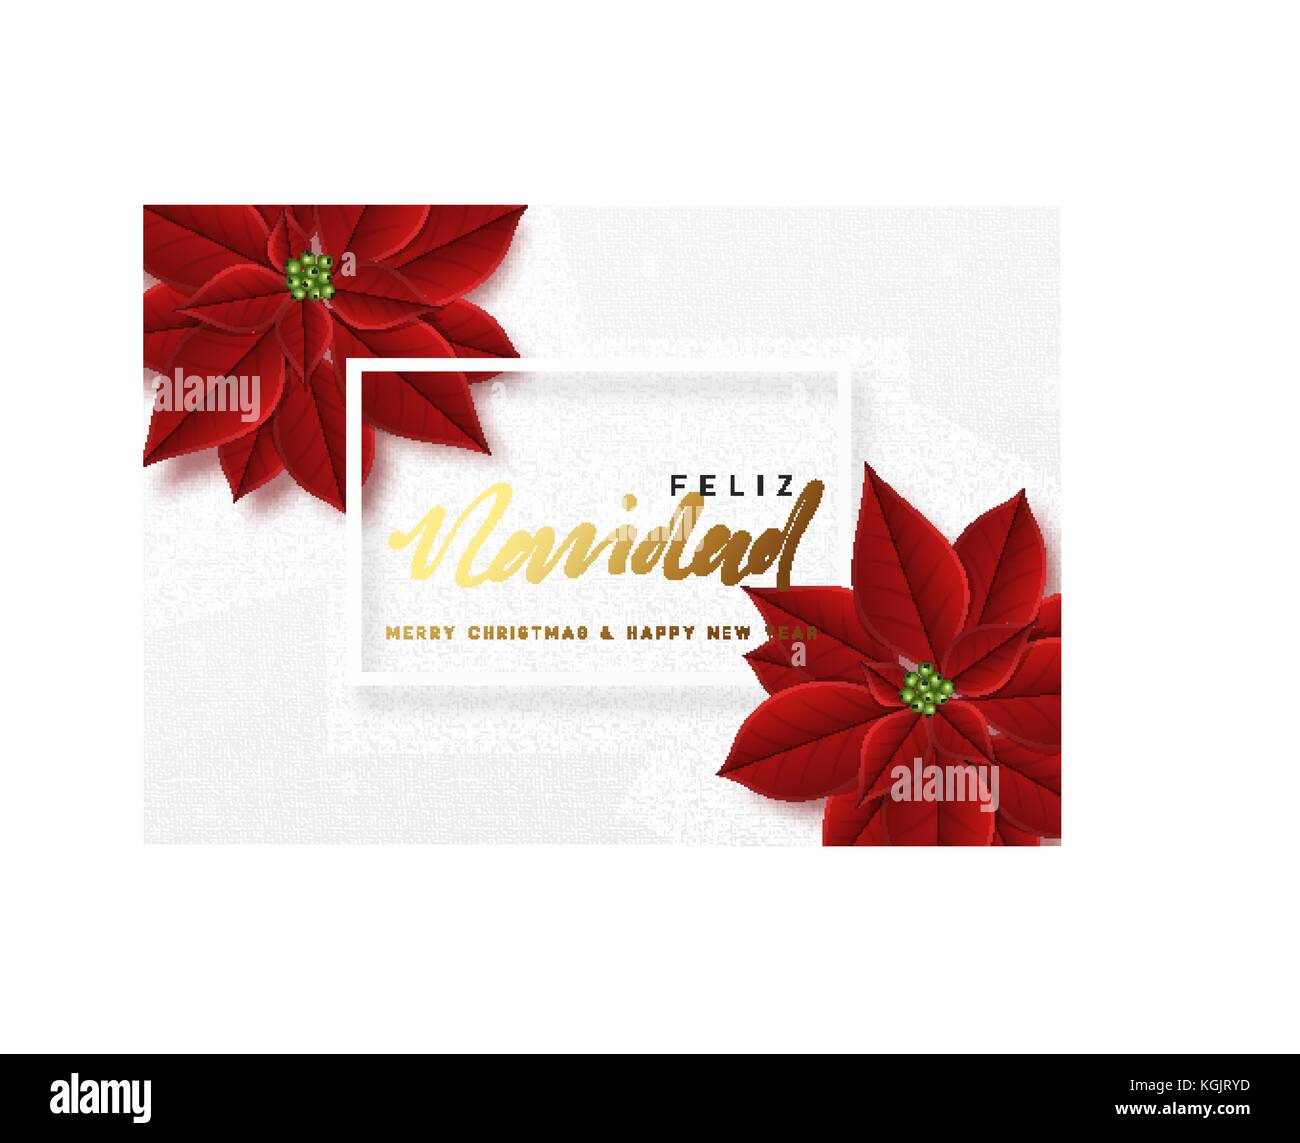 Merry Christmas, background decorated with beautiful red buds poinsettia flowers. Stock Vector